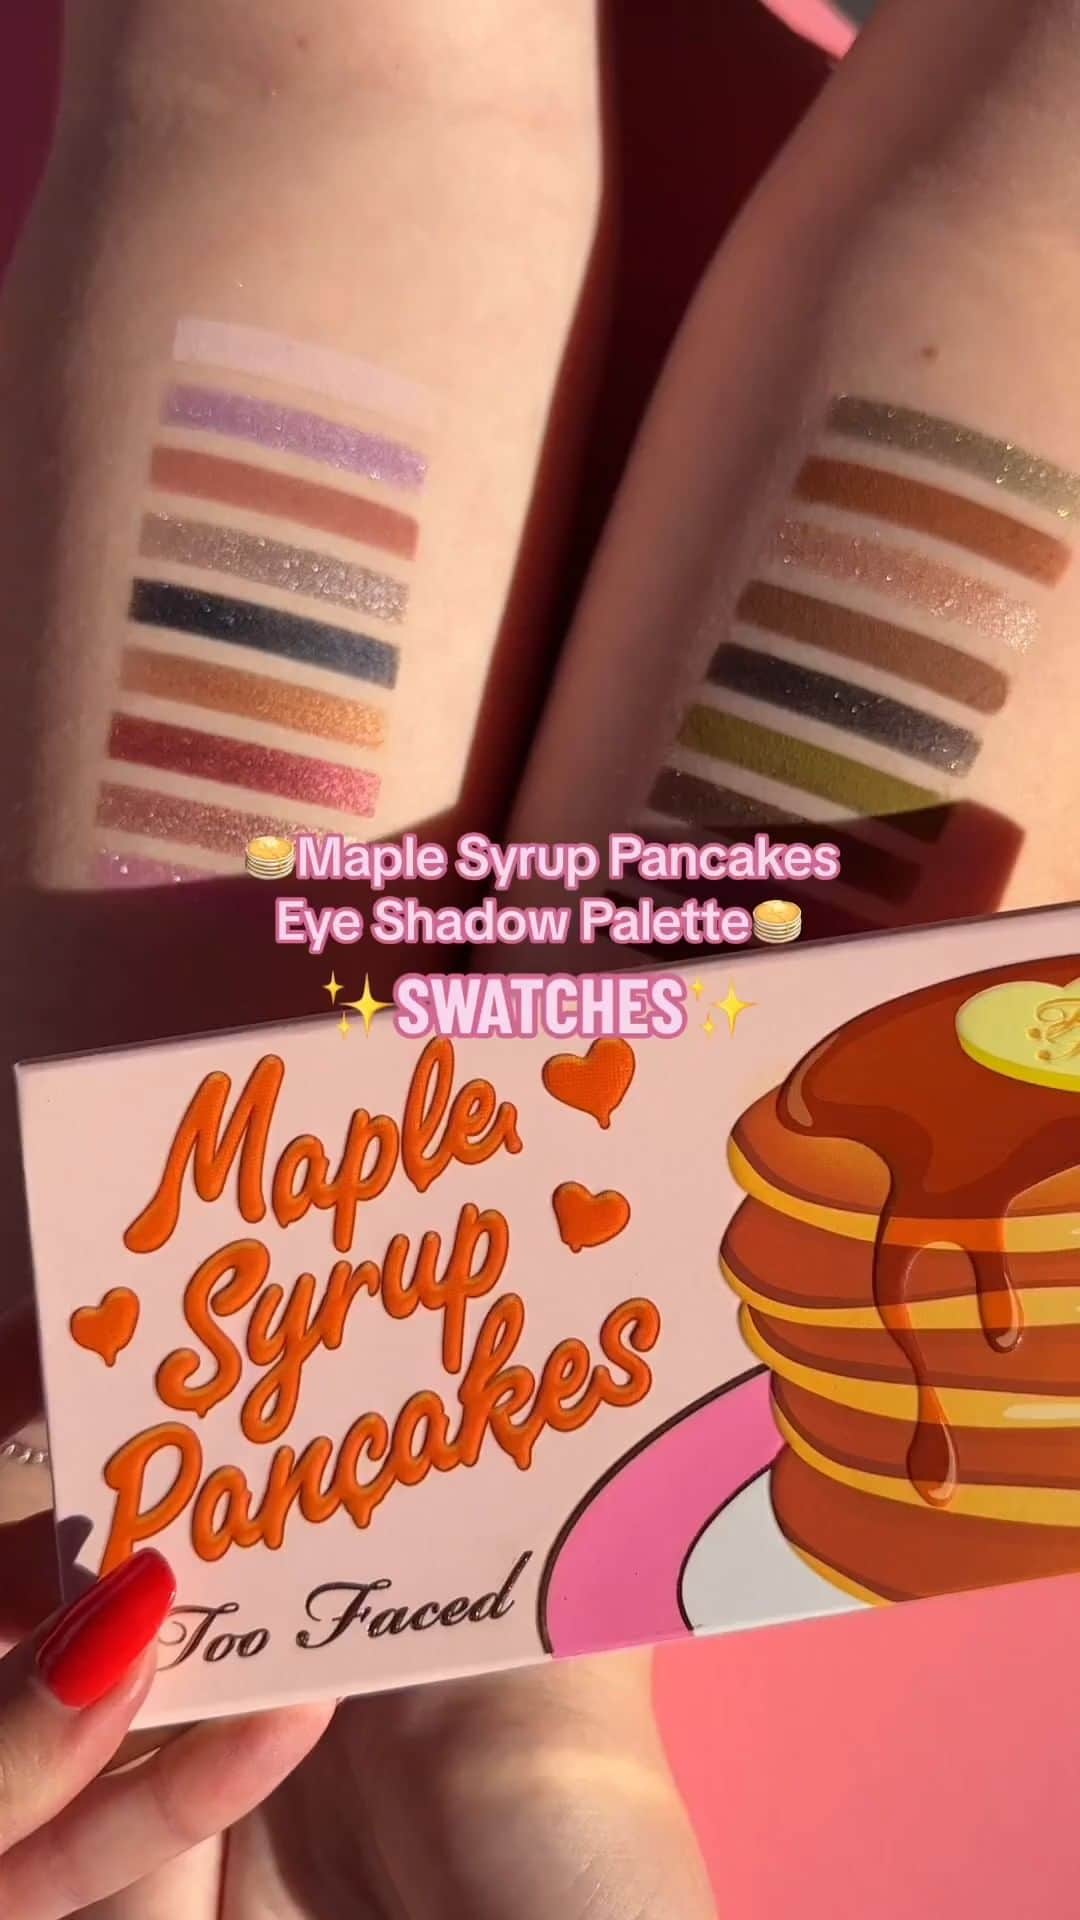 Too Facedのインスタグラム：「🥞✨ Maple Syrup Pancakes Palette Swatches! ✨🥞 Shop this warm & buttery palette now from toofaced.com! Did we mention this also smells just like Maple Syrup Pancakes?! 😍 #toofaced #tfcrueltyfree」